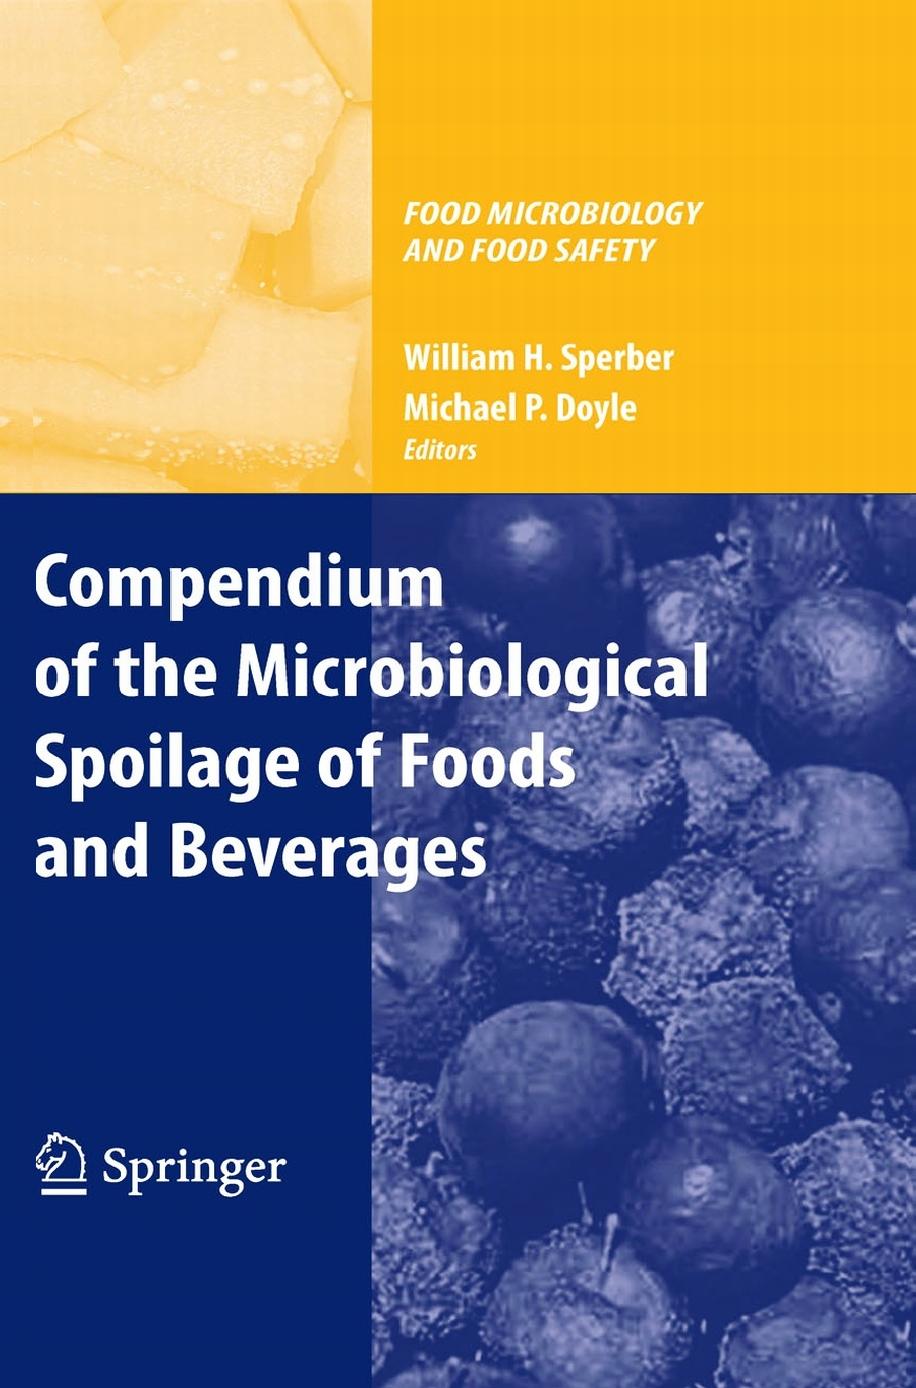 Introduction to the Microbiological Spoilage of Foods and Beverages